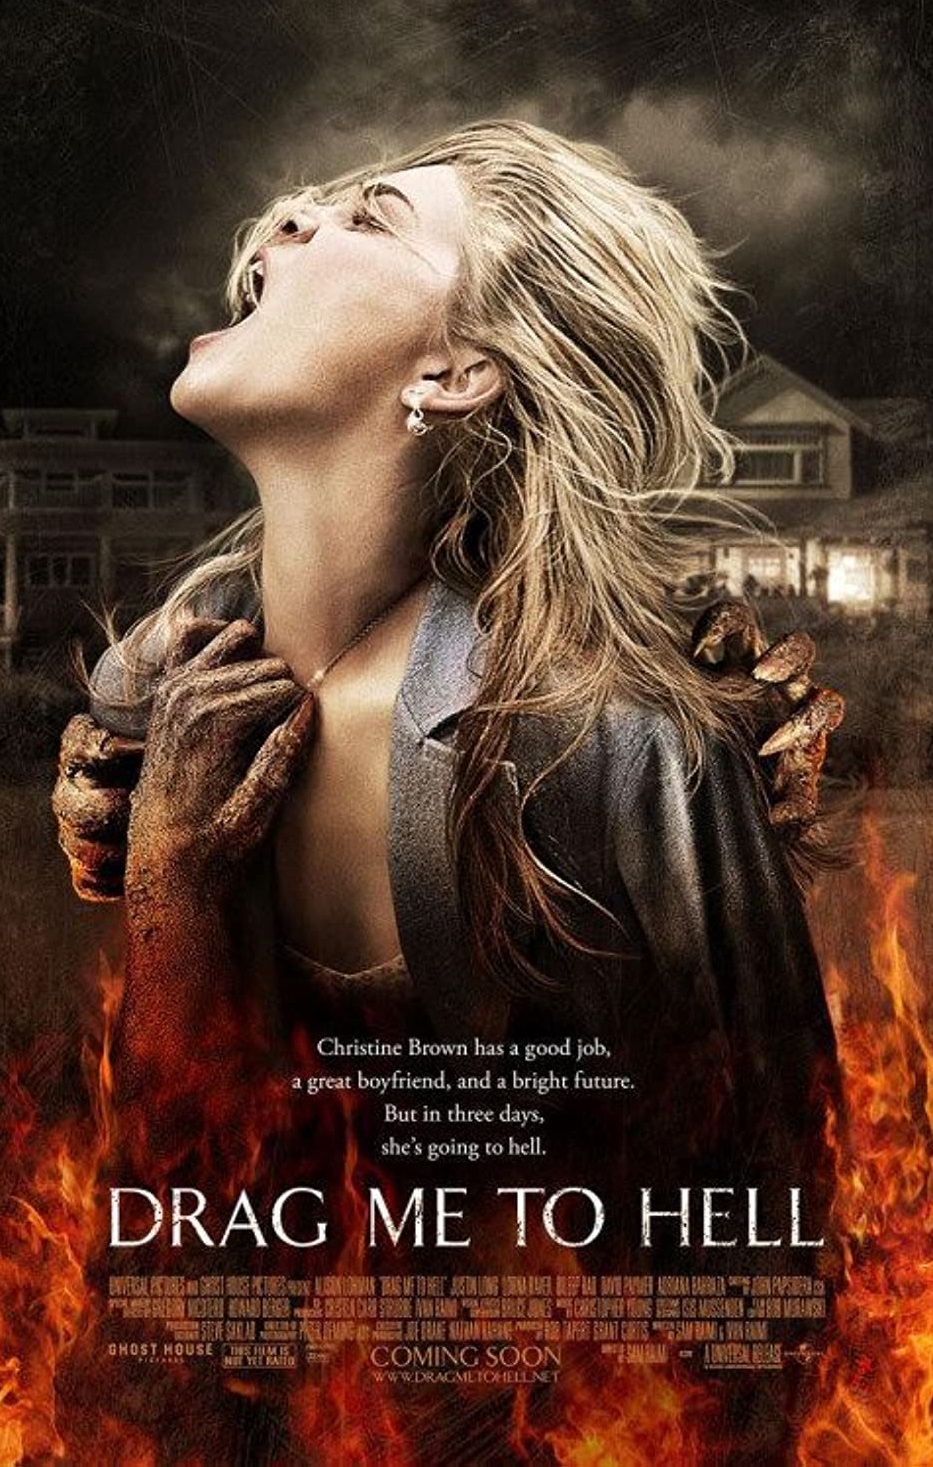 Drag Me to Hell 2009 Tamil Dubbed Horror Movie Online